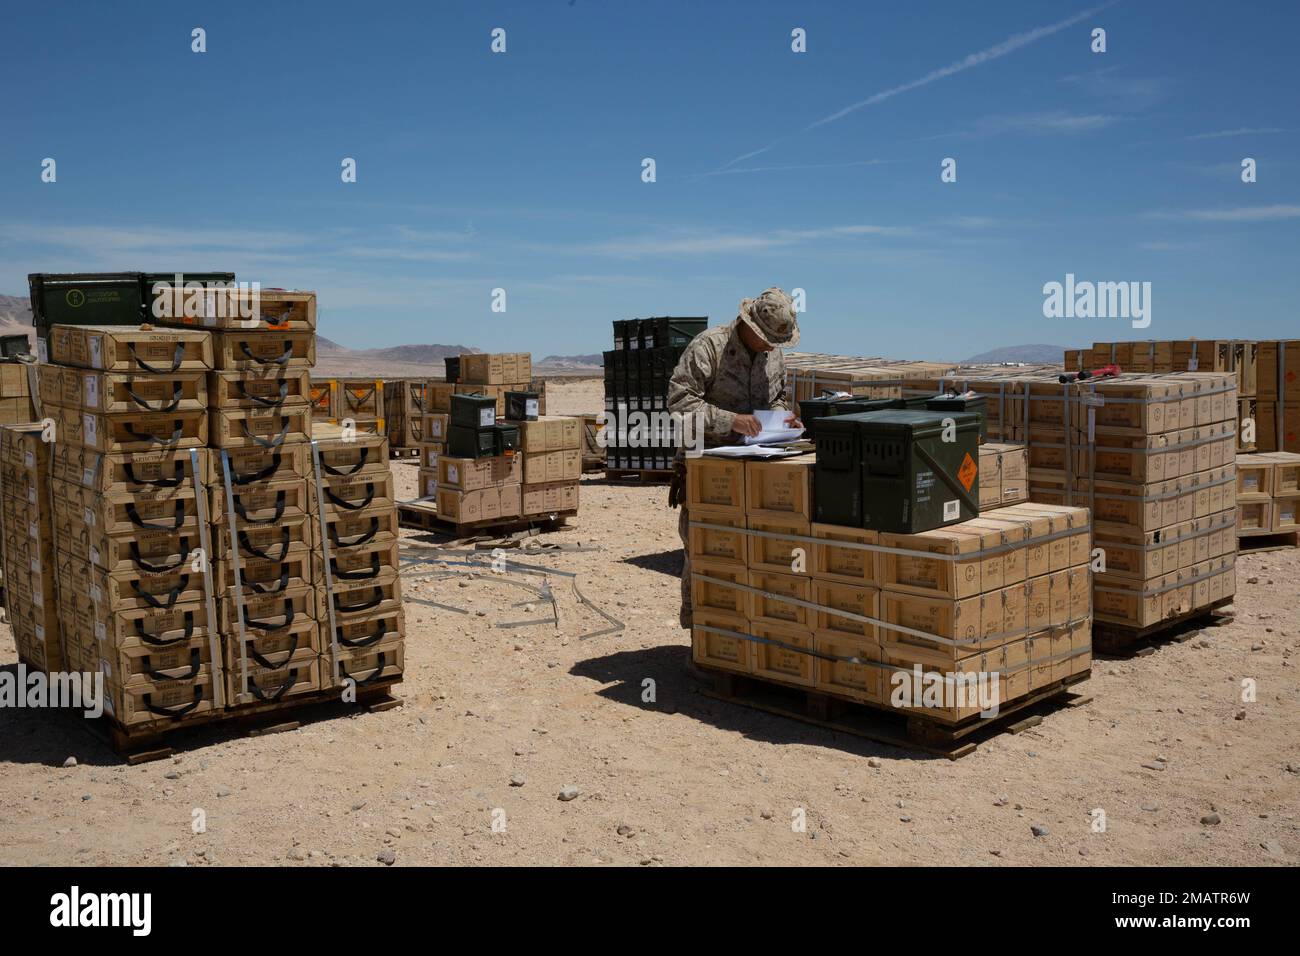 U.S. Marine Corps Sgt. Glenn Delavega, an ammunition technician with Combat Logistics Battalion 13, 13th Marine Expeditionary Unit, inspects and verifies ammunition in support of an upcoming range during a Realistic Urban Training exercise at Marine Corp Air Ground Combat Center Twentynine Palms on June 4, 2022. The 13th MEU is currently conducting RUT exercise to enhance the integration and collective capability of the MEU’s command, air, ground, and logistics elements and prepare the 13th MEU to meet the nation’s crisis response needs during their upcoming overseas deployment. Stock Photo